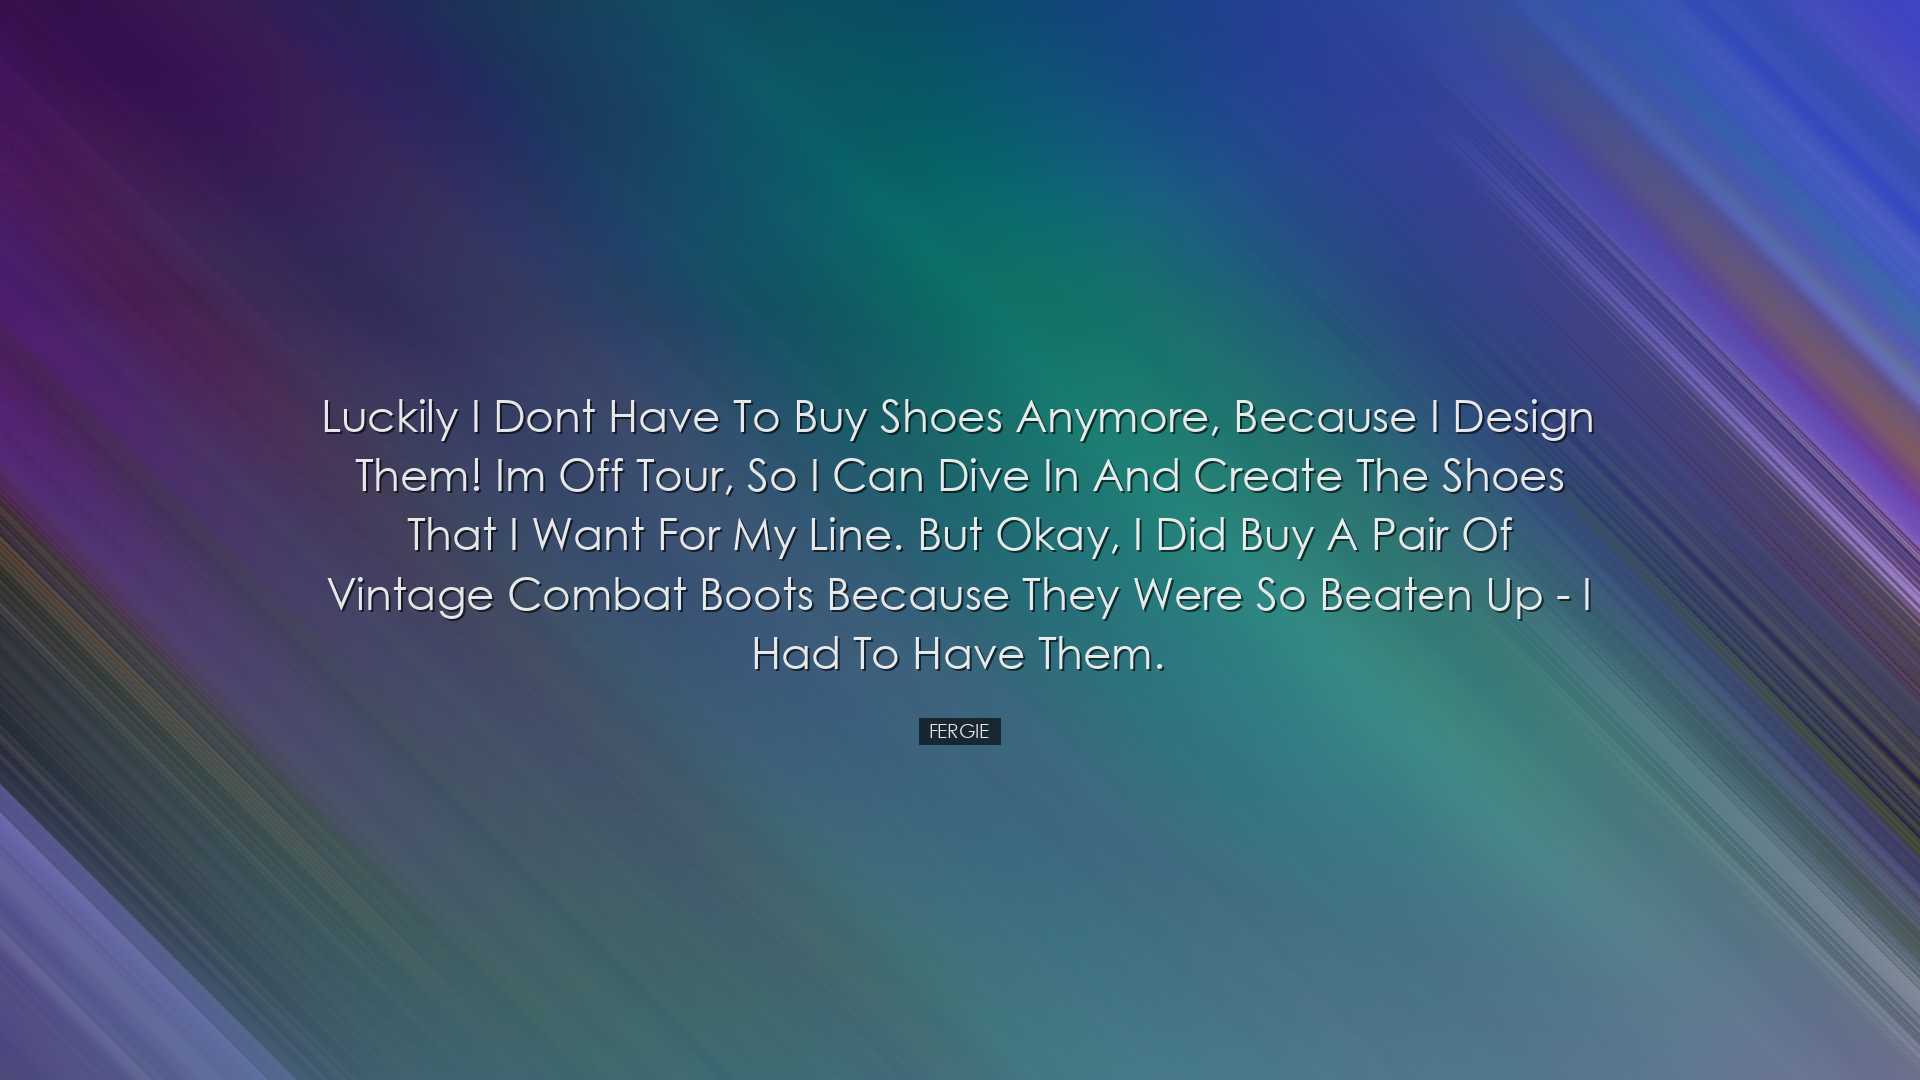 Luckily I dont have to buy shoes anymore, because I design them! I